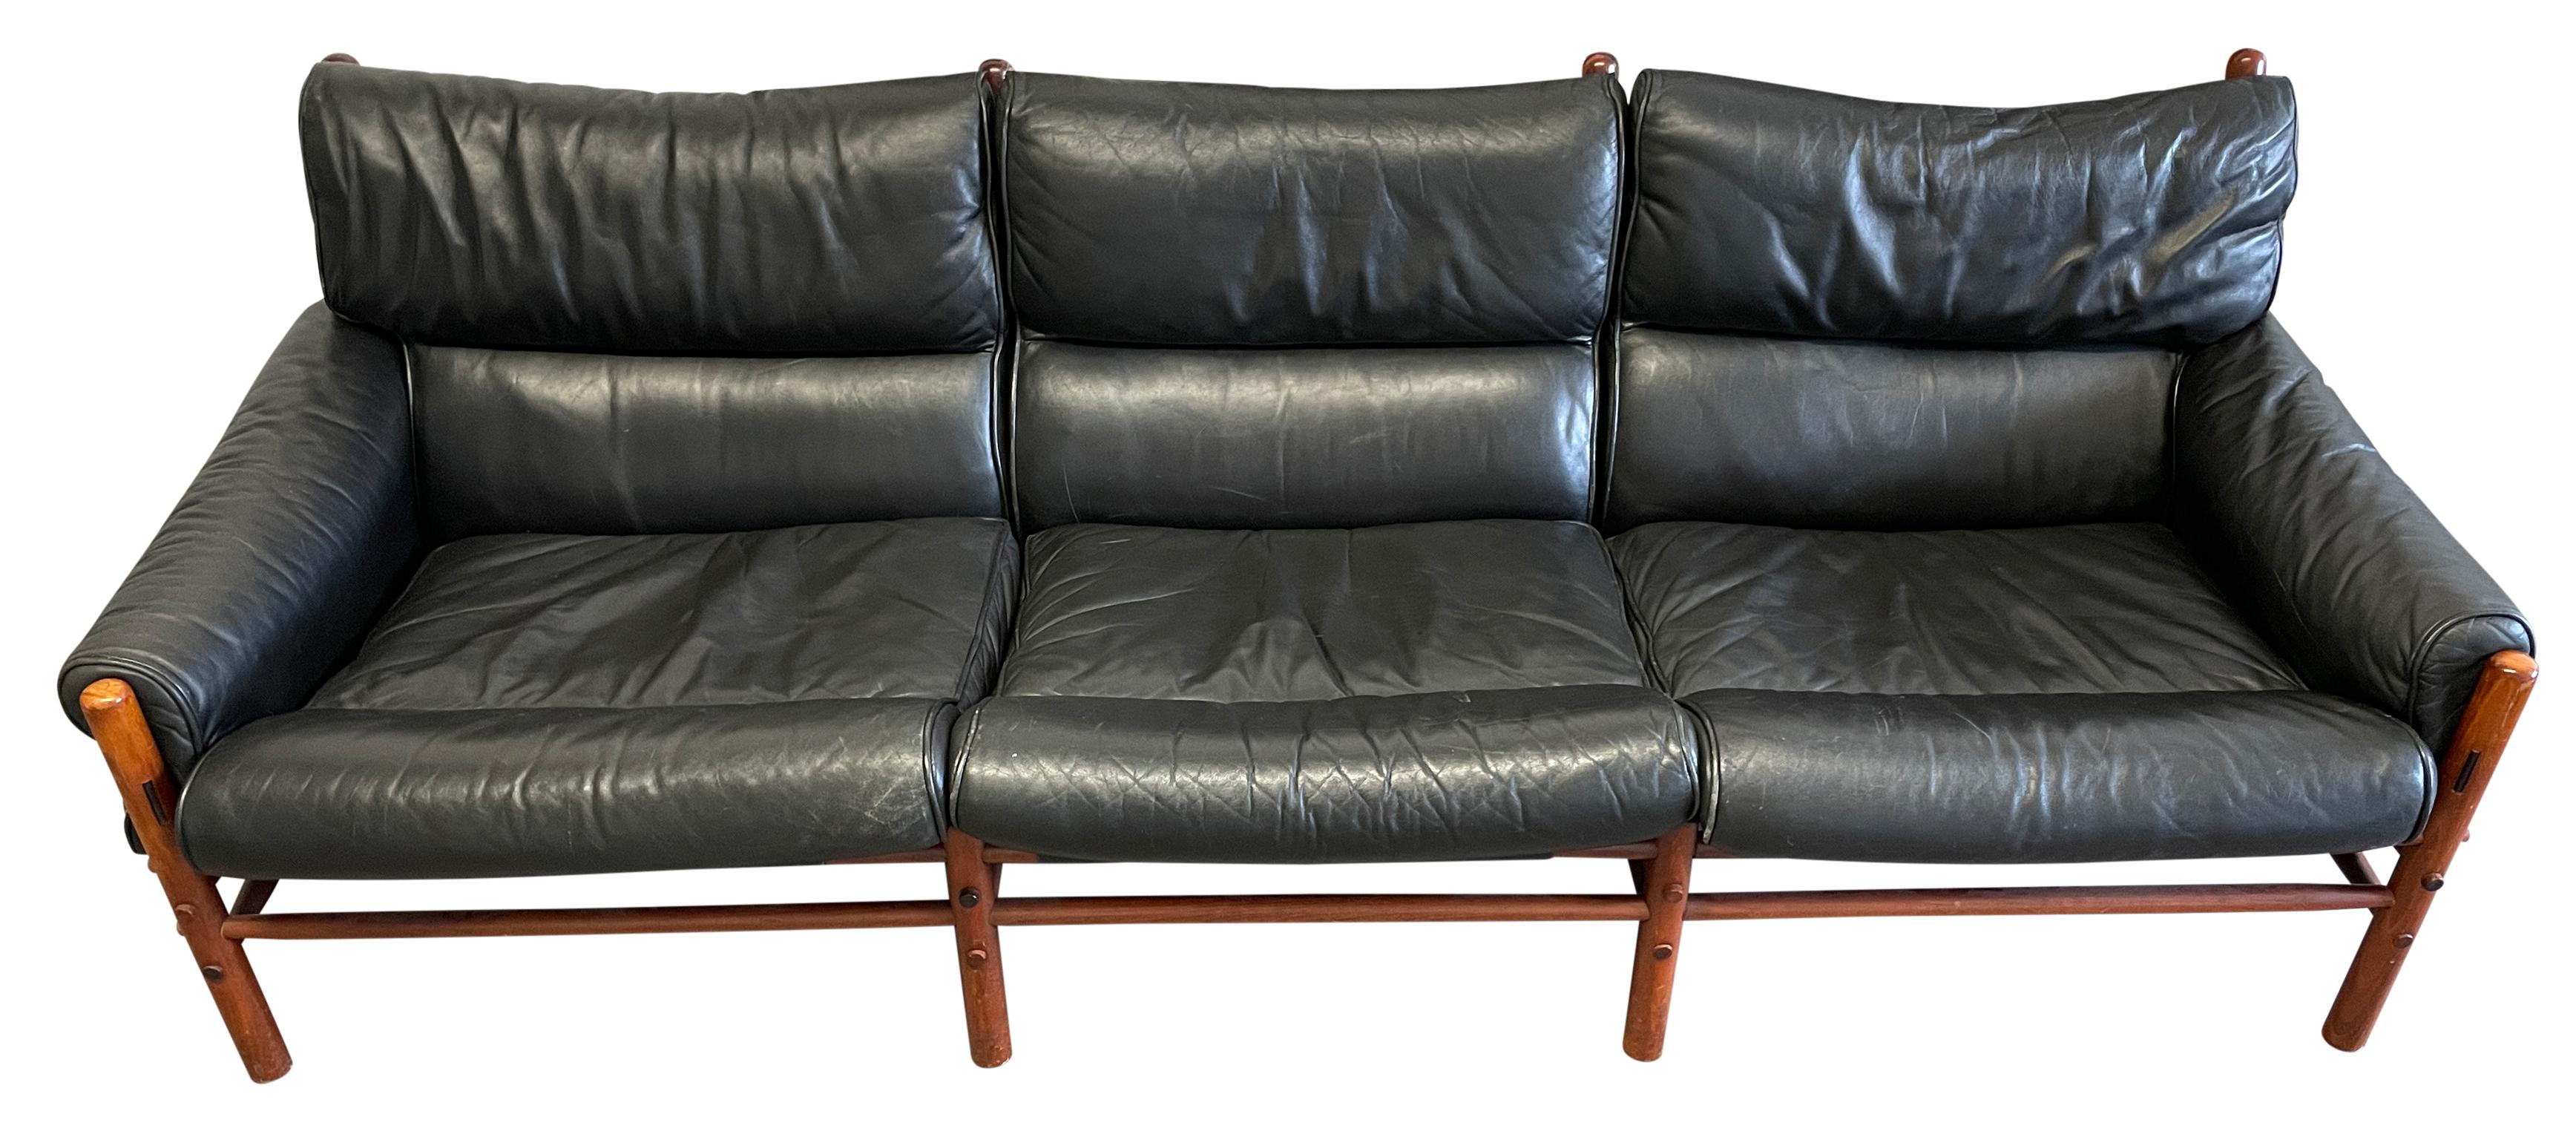 Arne Norell Kontiki sofa Swedish Design

Arne Norell (Sweden, 1917-1971). Mid-century modern Teak and soft black leather. Norell Sweden label. wear and creases to leather, wood with wear consistent with age. Beautiful Vintage Condition. Located in